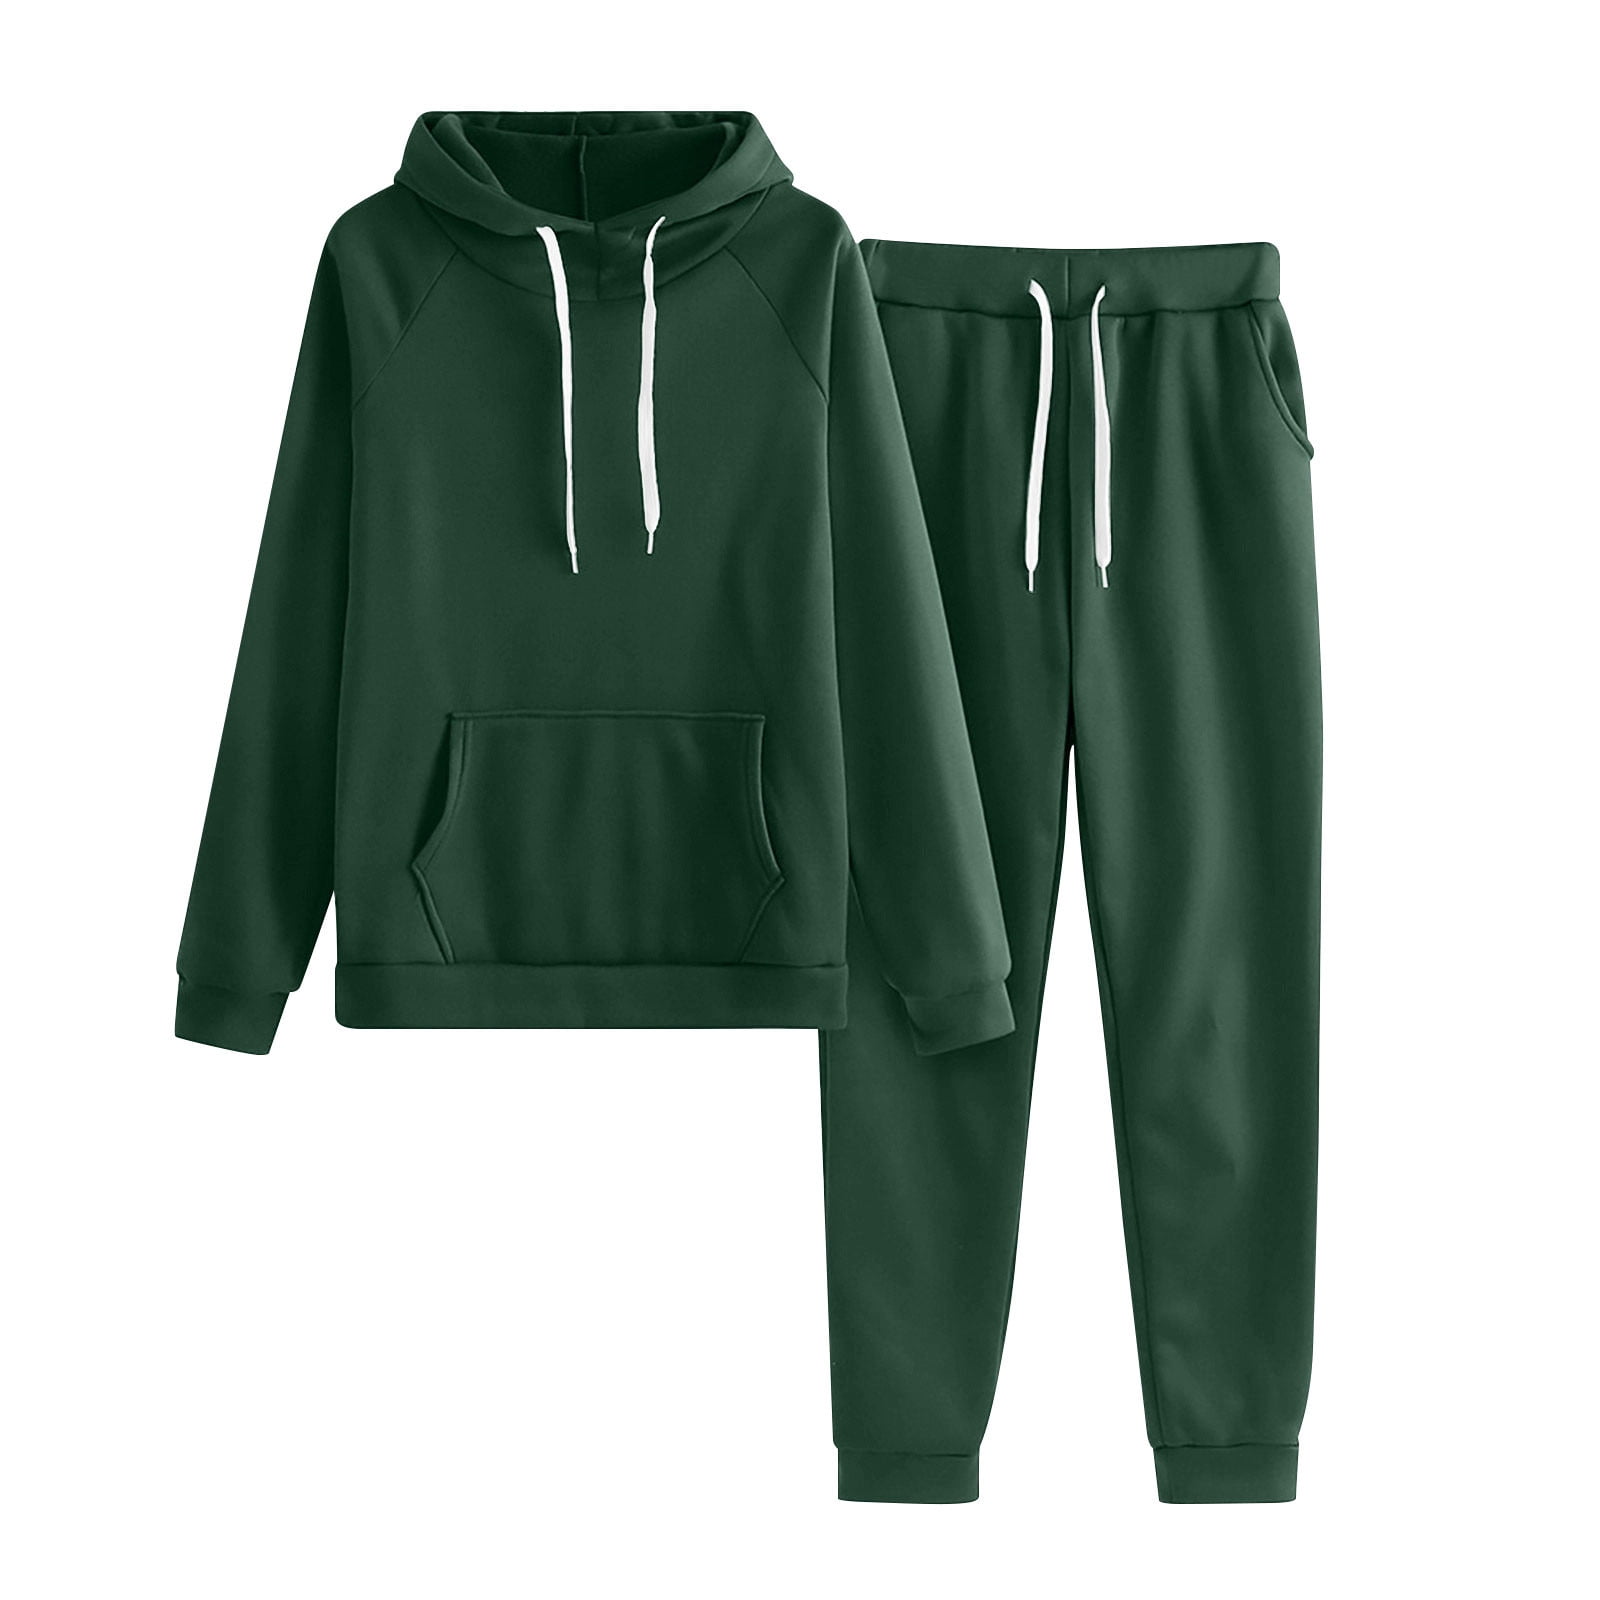 Besolor Women Jogger Outfit Matching Tracksuit Long Sleeve Hooded ...